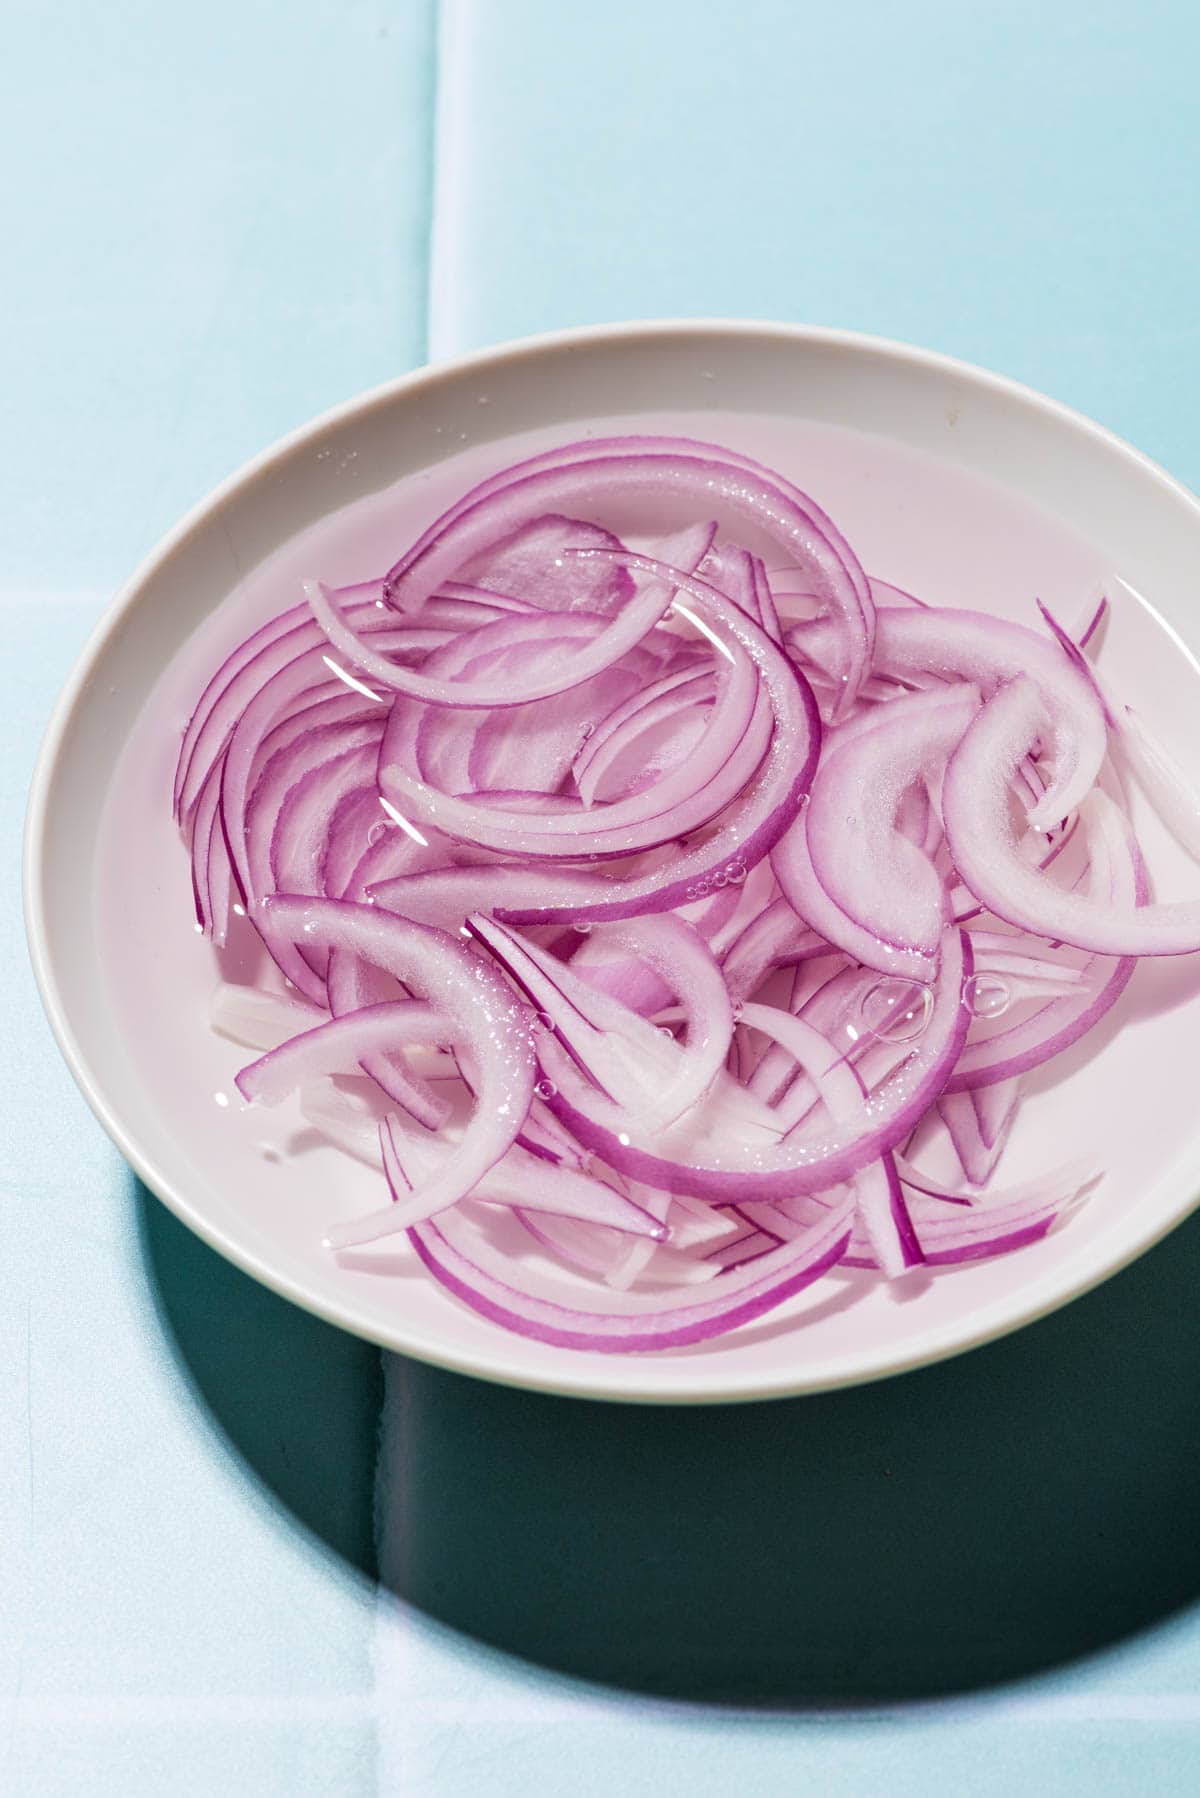 Sliced red onions soaking in a bowl of water.